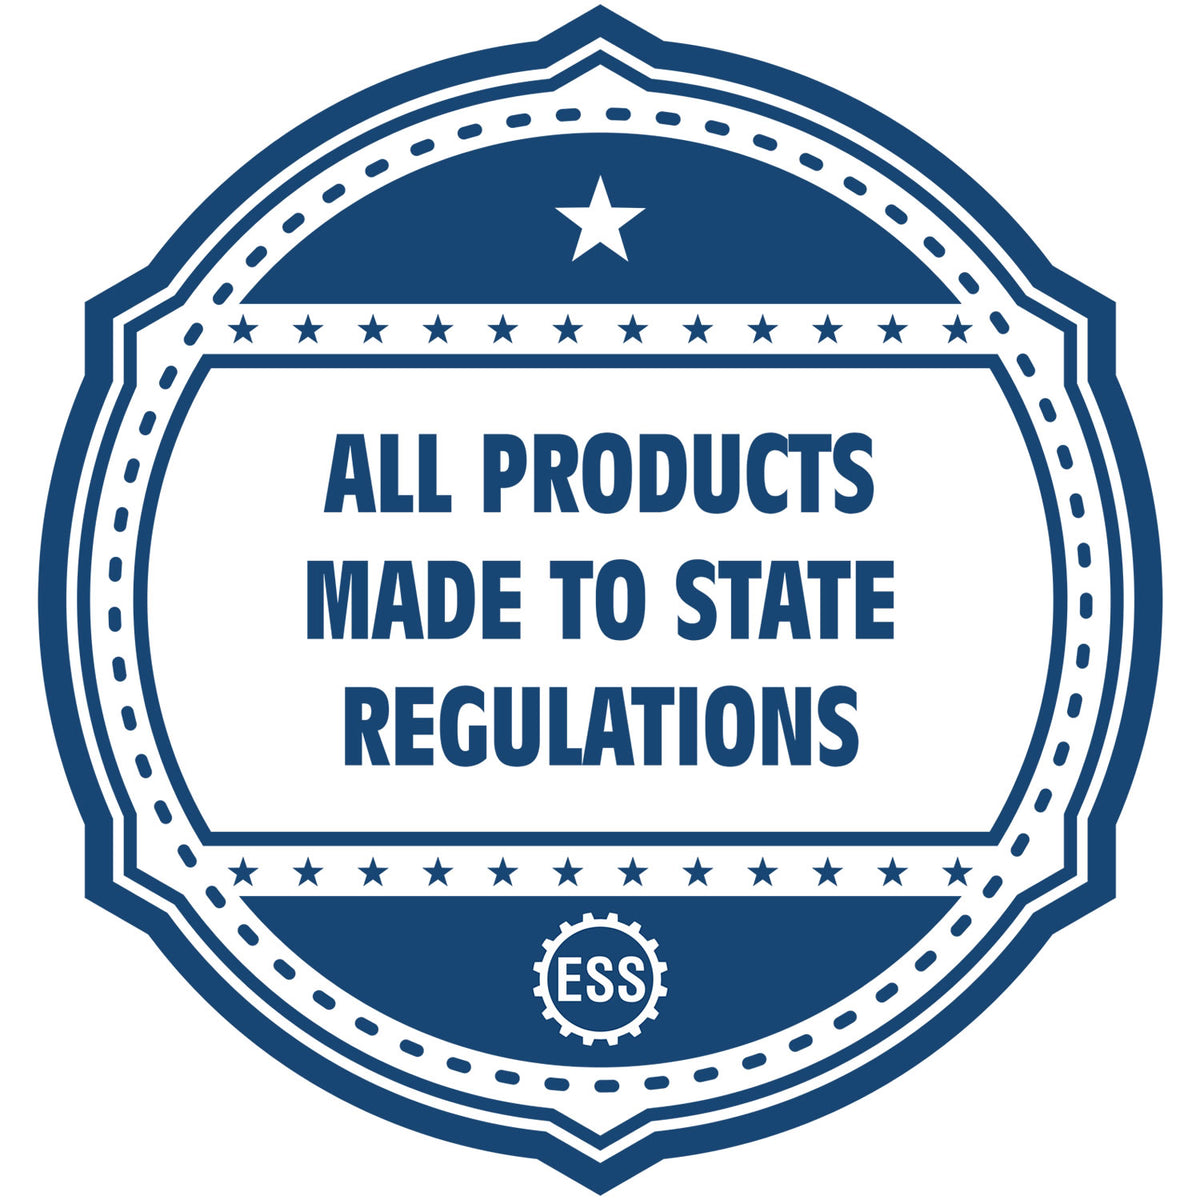 A blue icon or badge for the Hybrid Idaho Landscape Architect Seal showing that this product is made in compliance with state regulations.